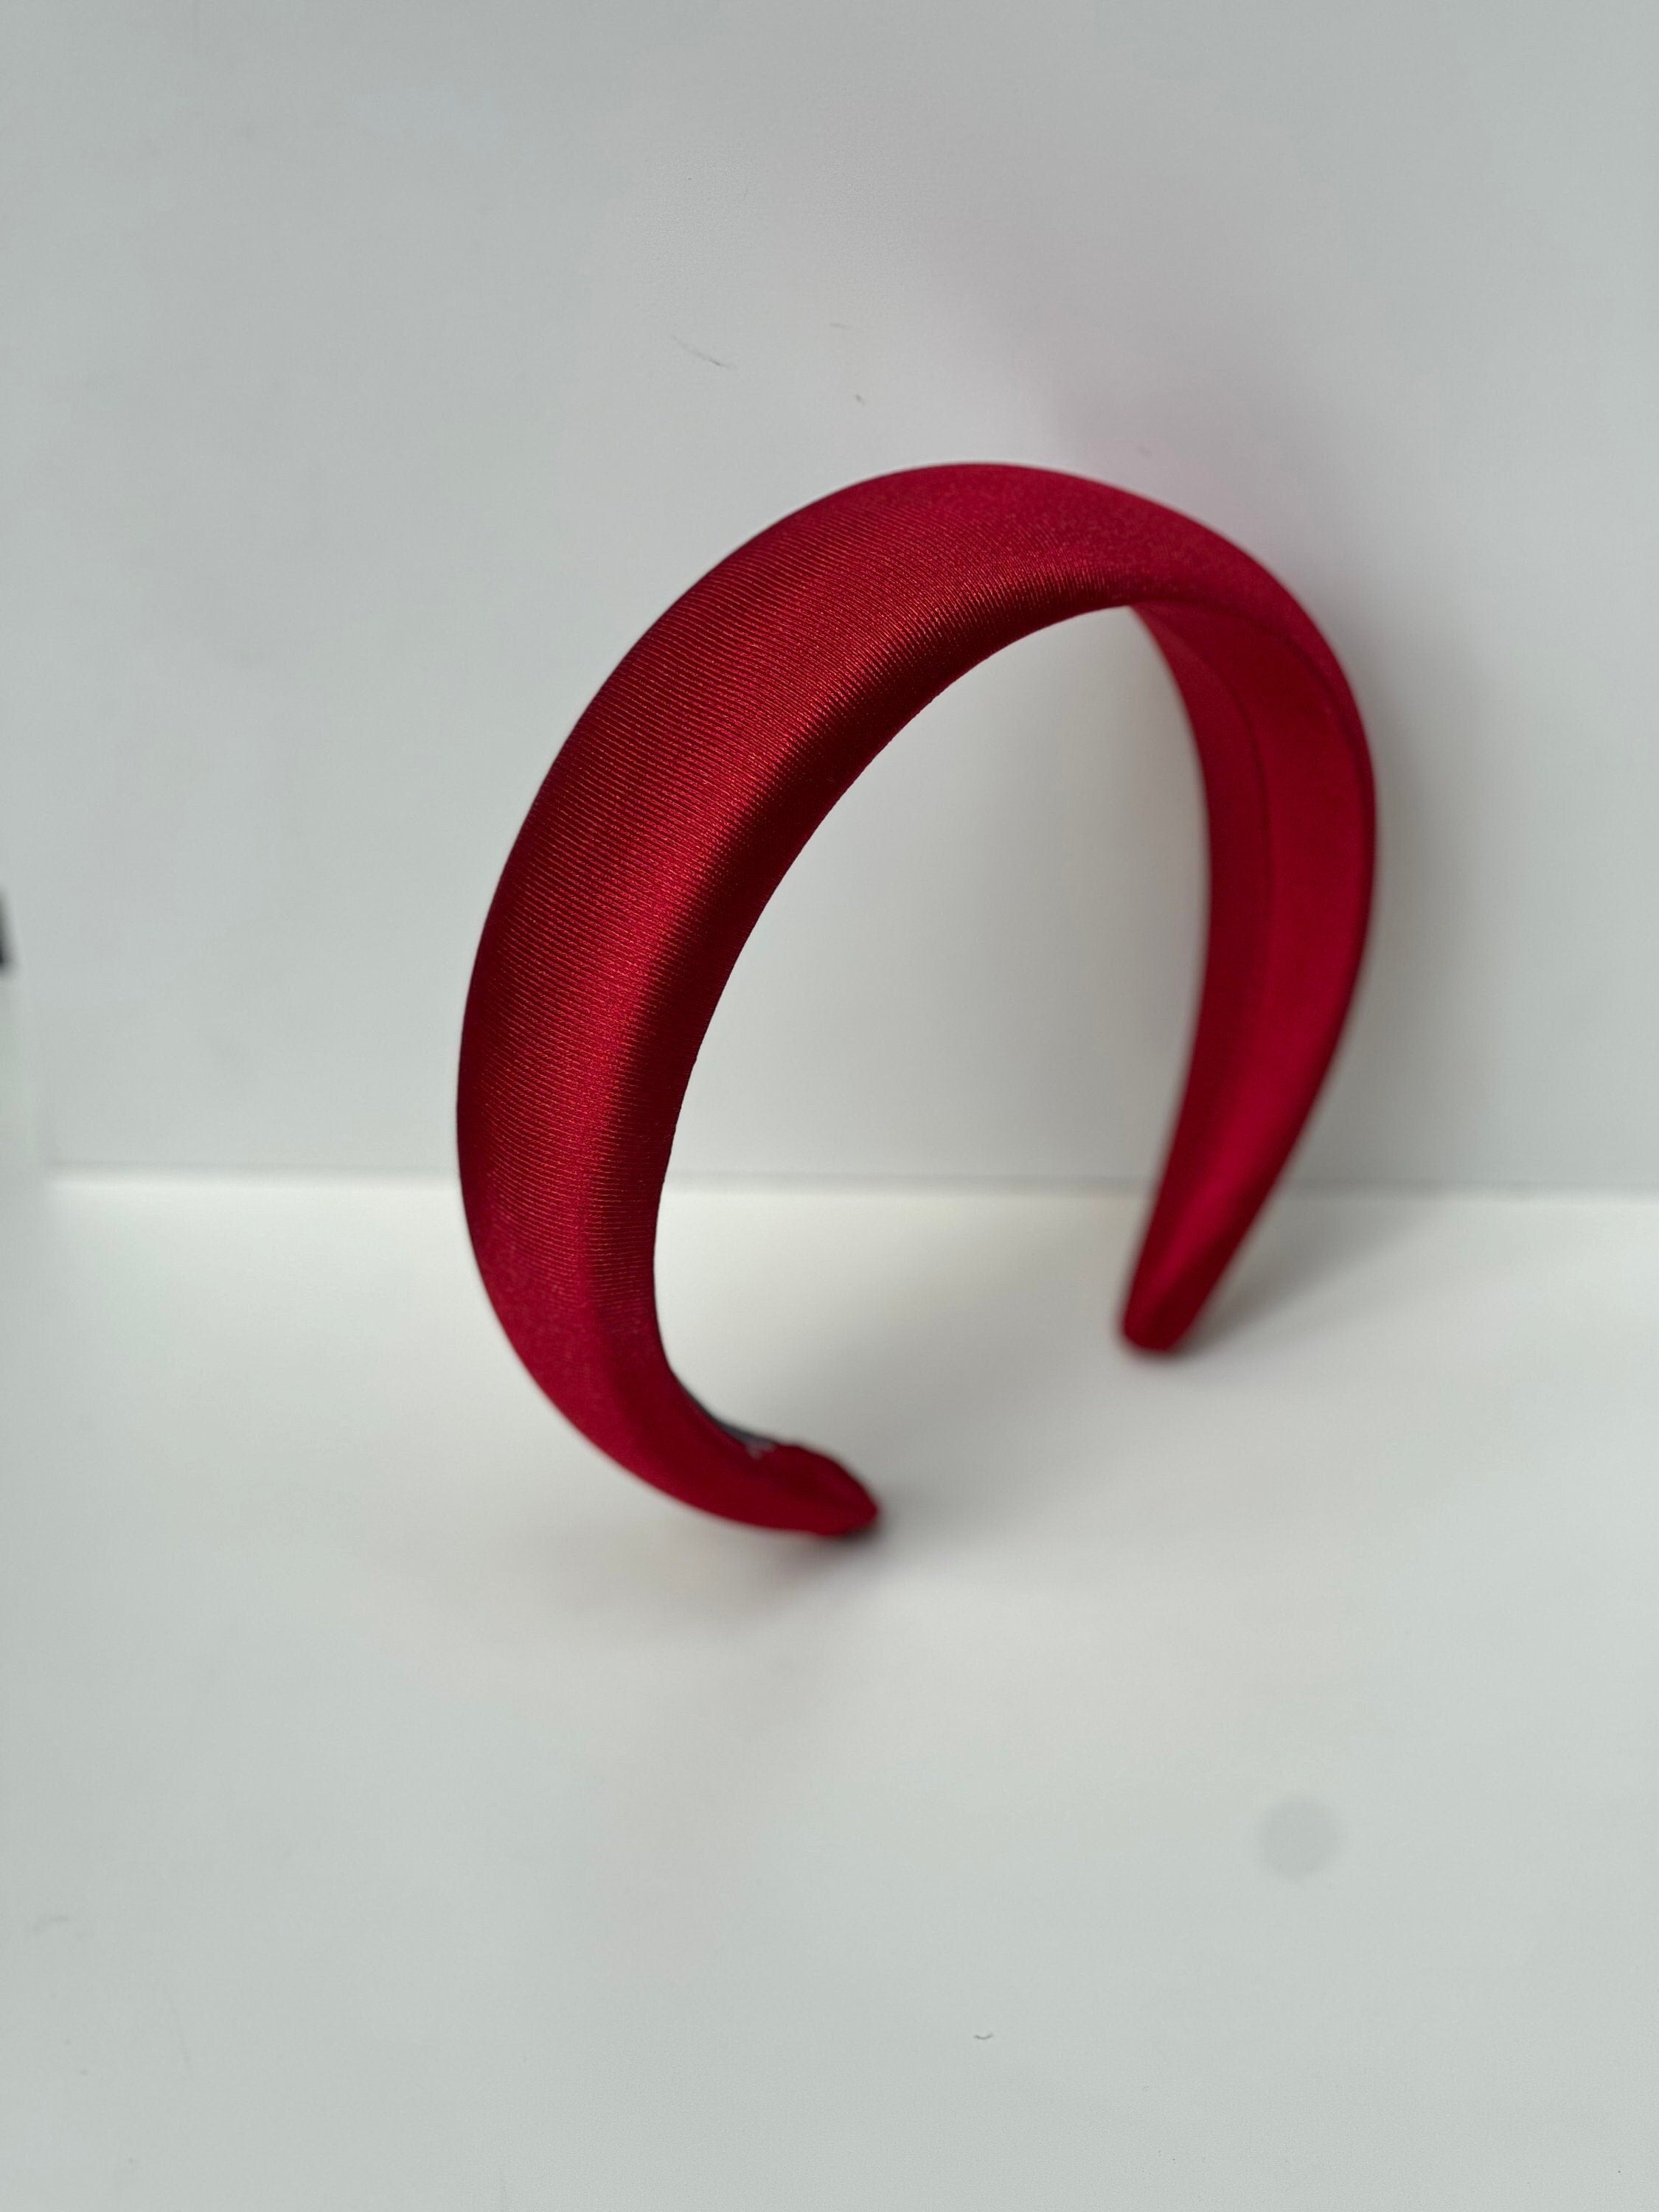 Make a bold statement with this bright red satin headband, a chic accessory for women.